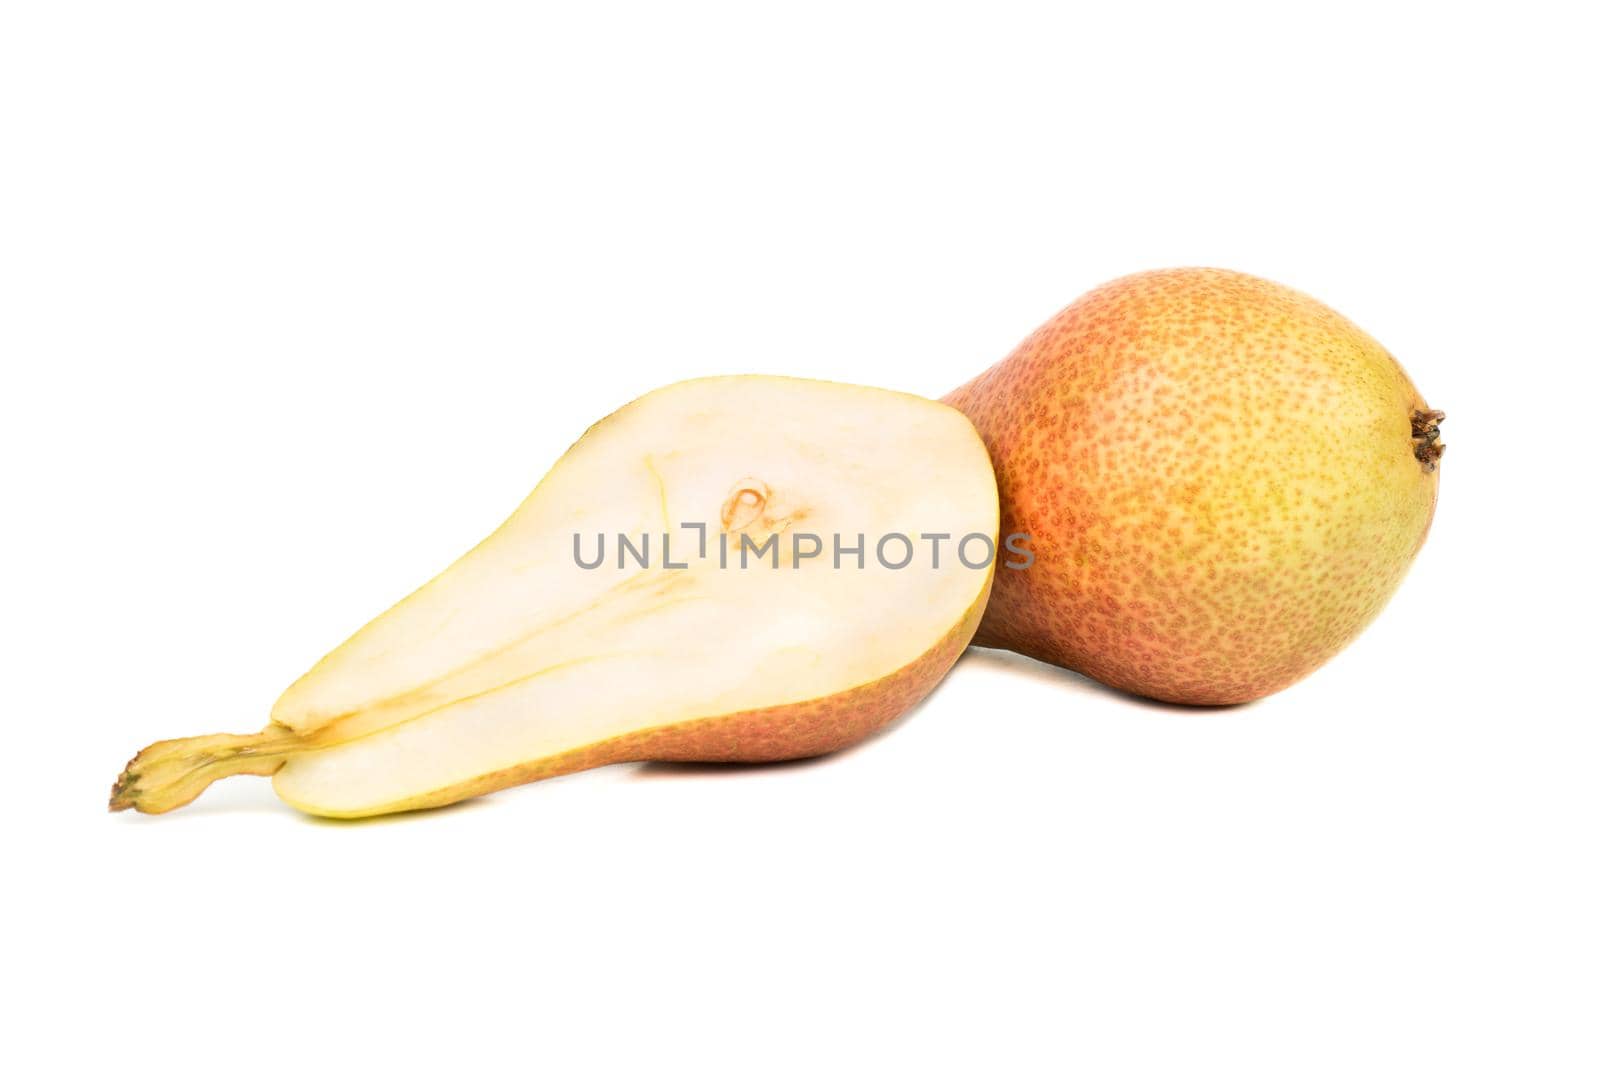 Fresh juicy pear with half on white background